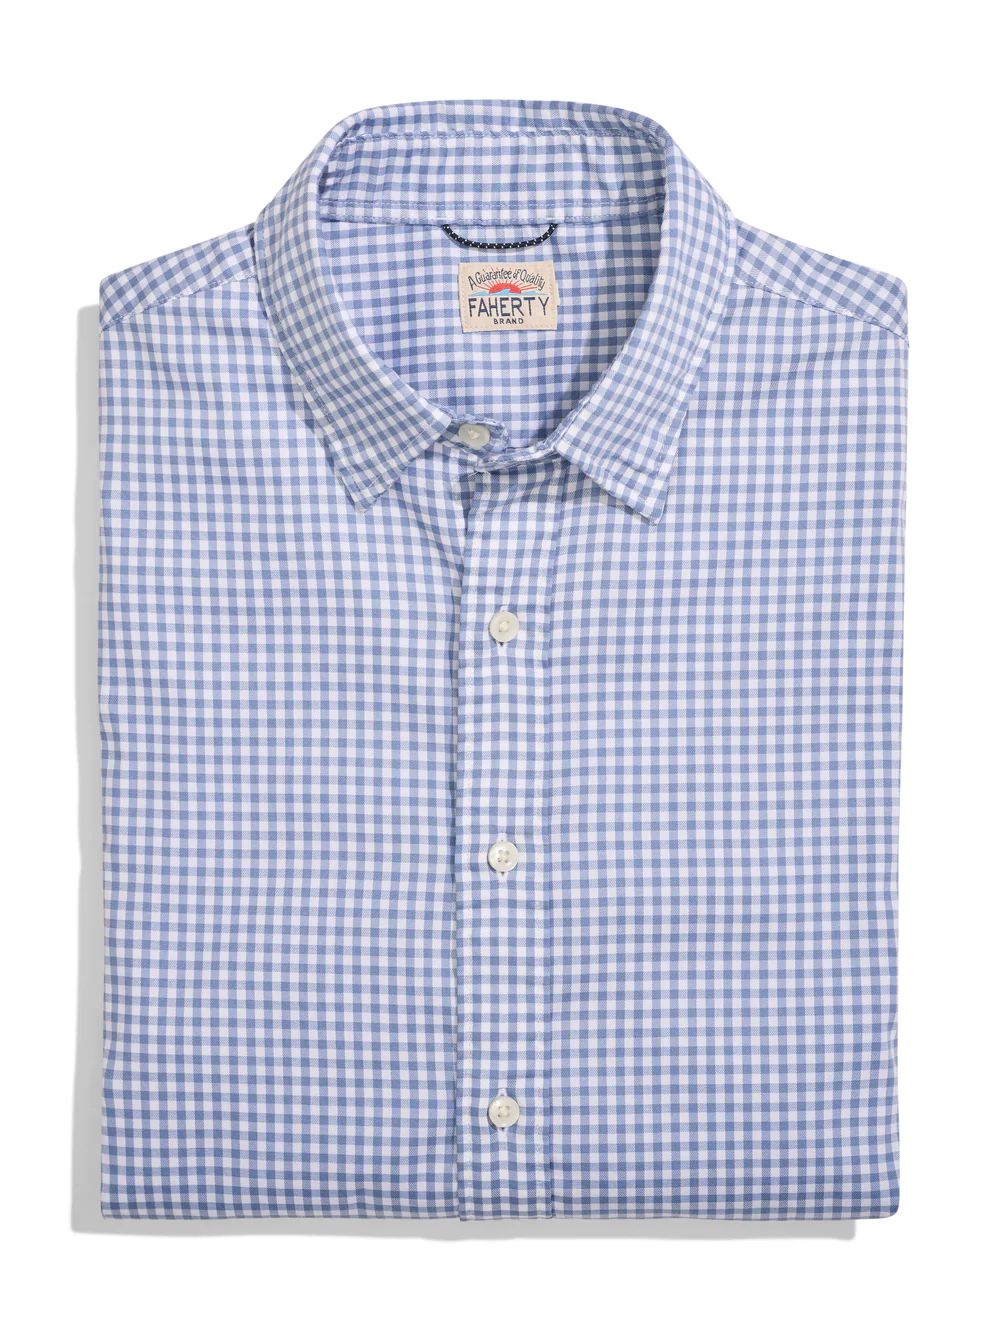 The Movement™ Shirt | Faherty